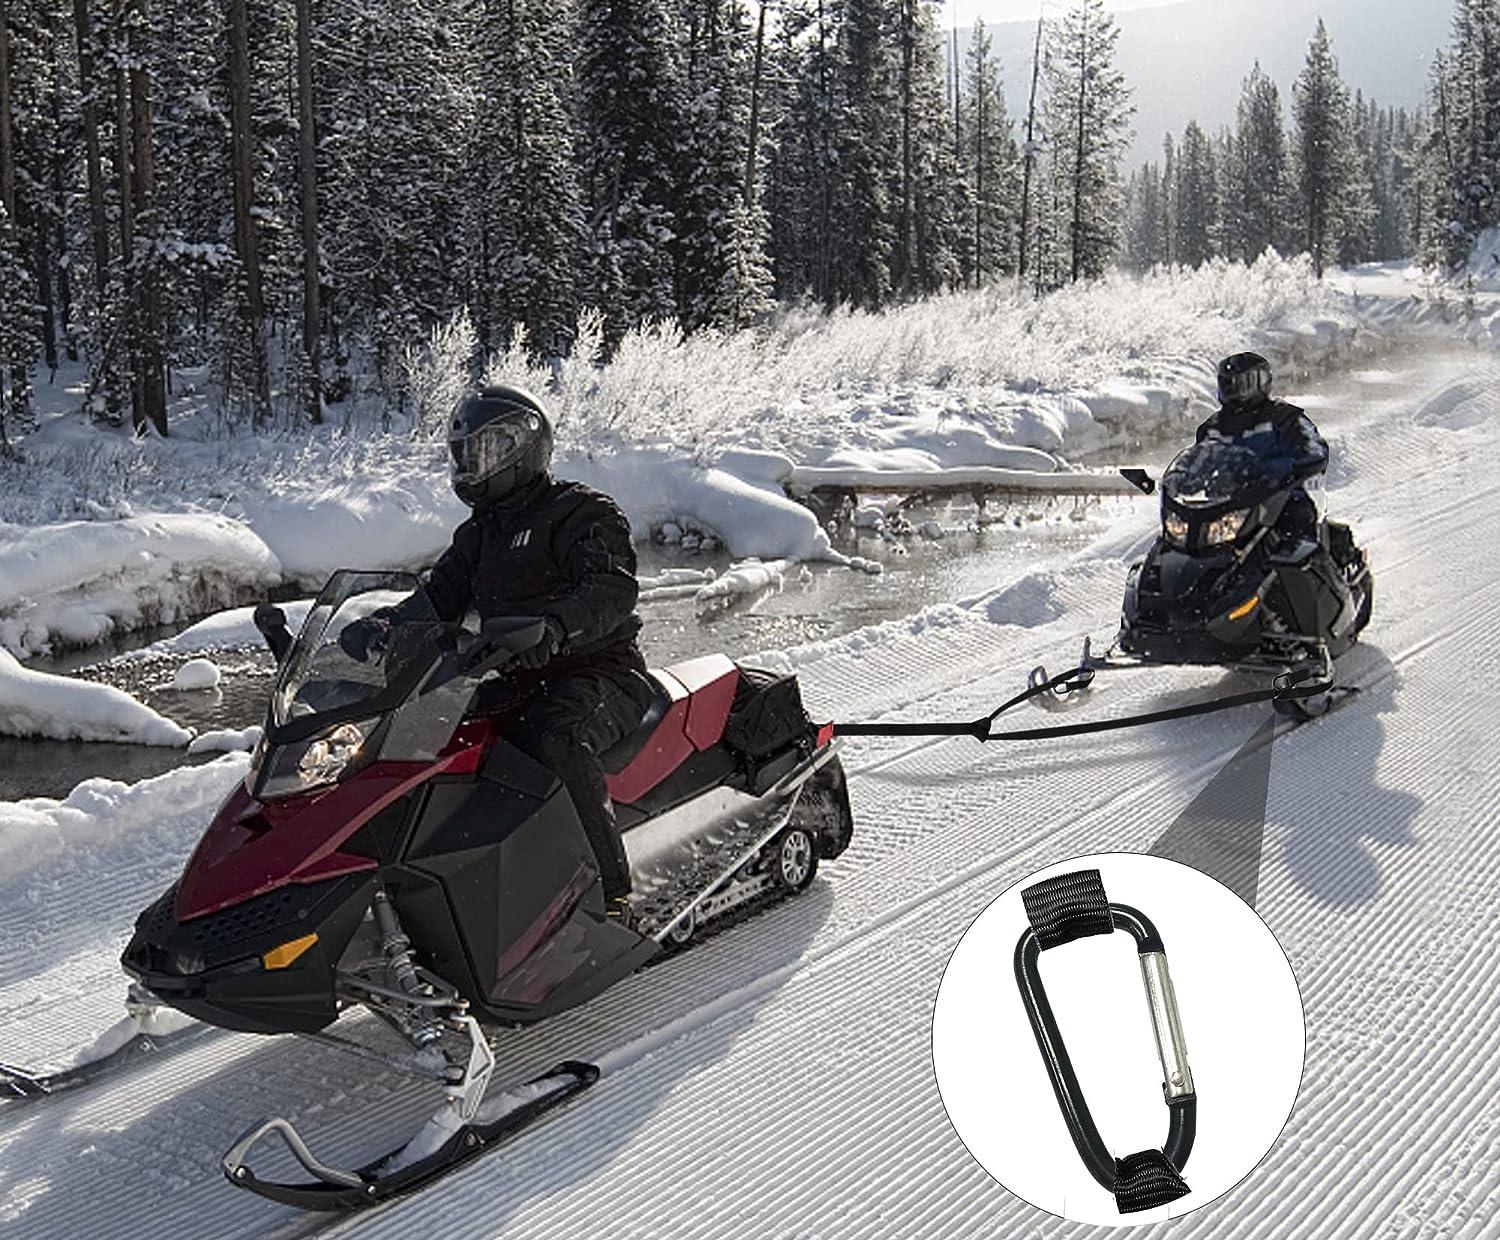 Snowmobile Tow Strap Heavy Duty with Hook, Emergency Snowmobile Tow Rope,  Quick Hook Up and Tow Easilly for Snowmobile, ATV, UTV, Sled, Skidoo,  Snowmobile Accessories Safety Kit